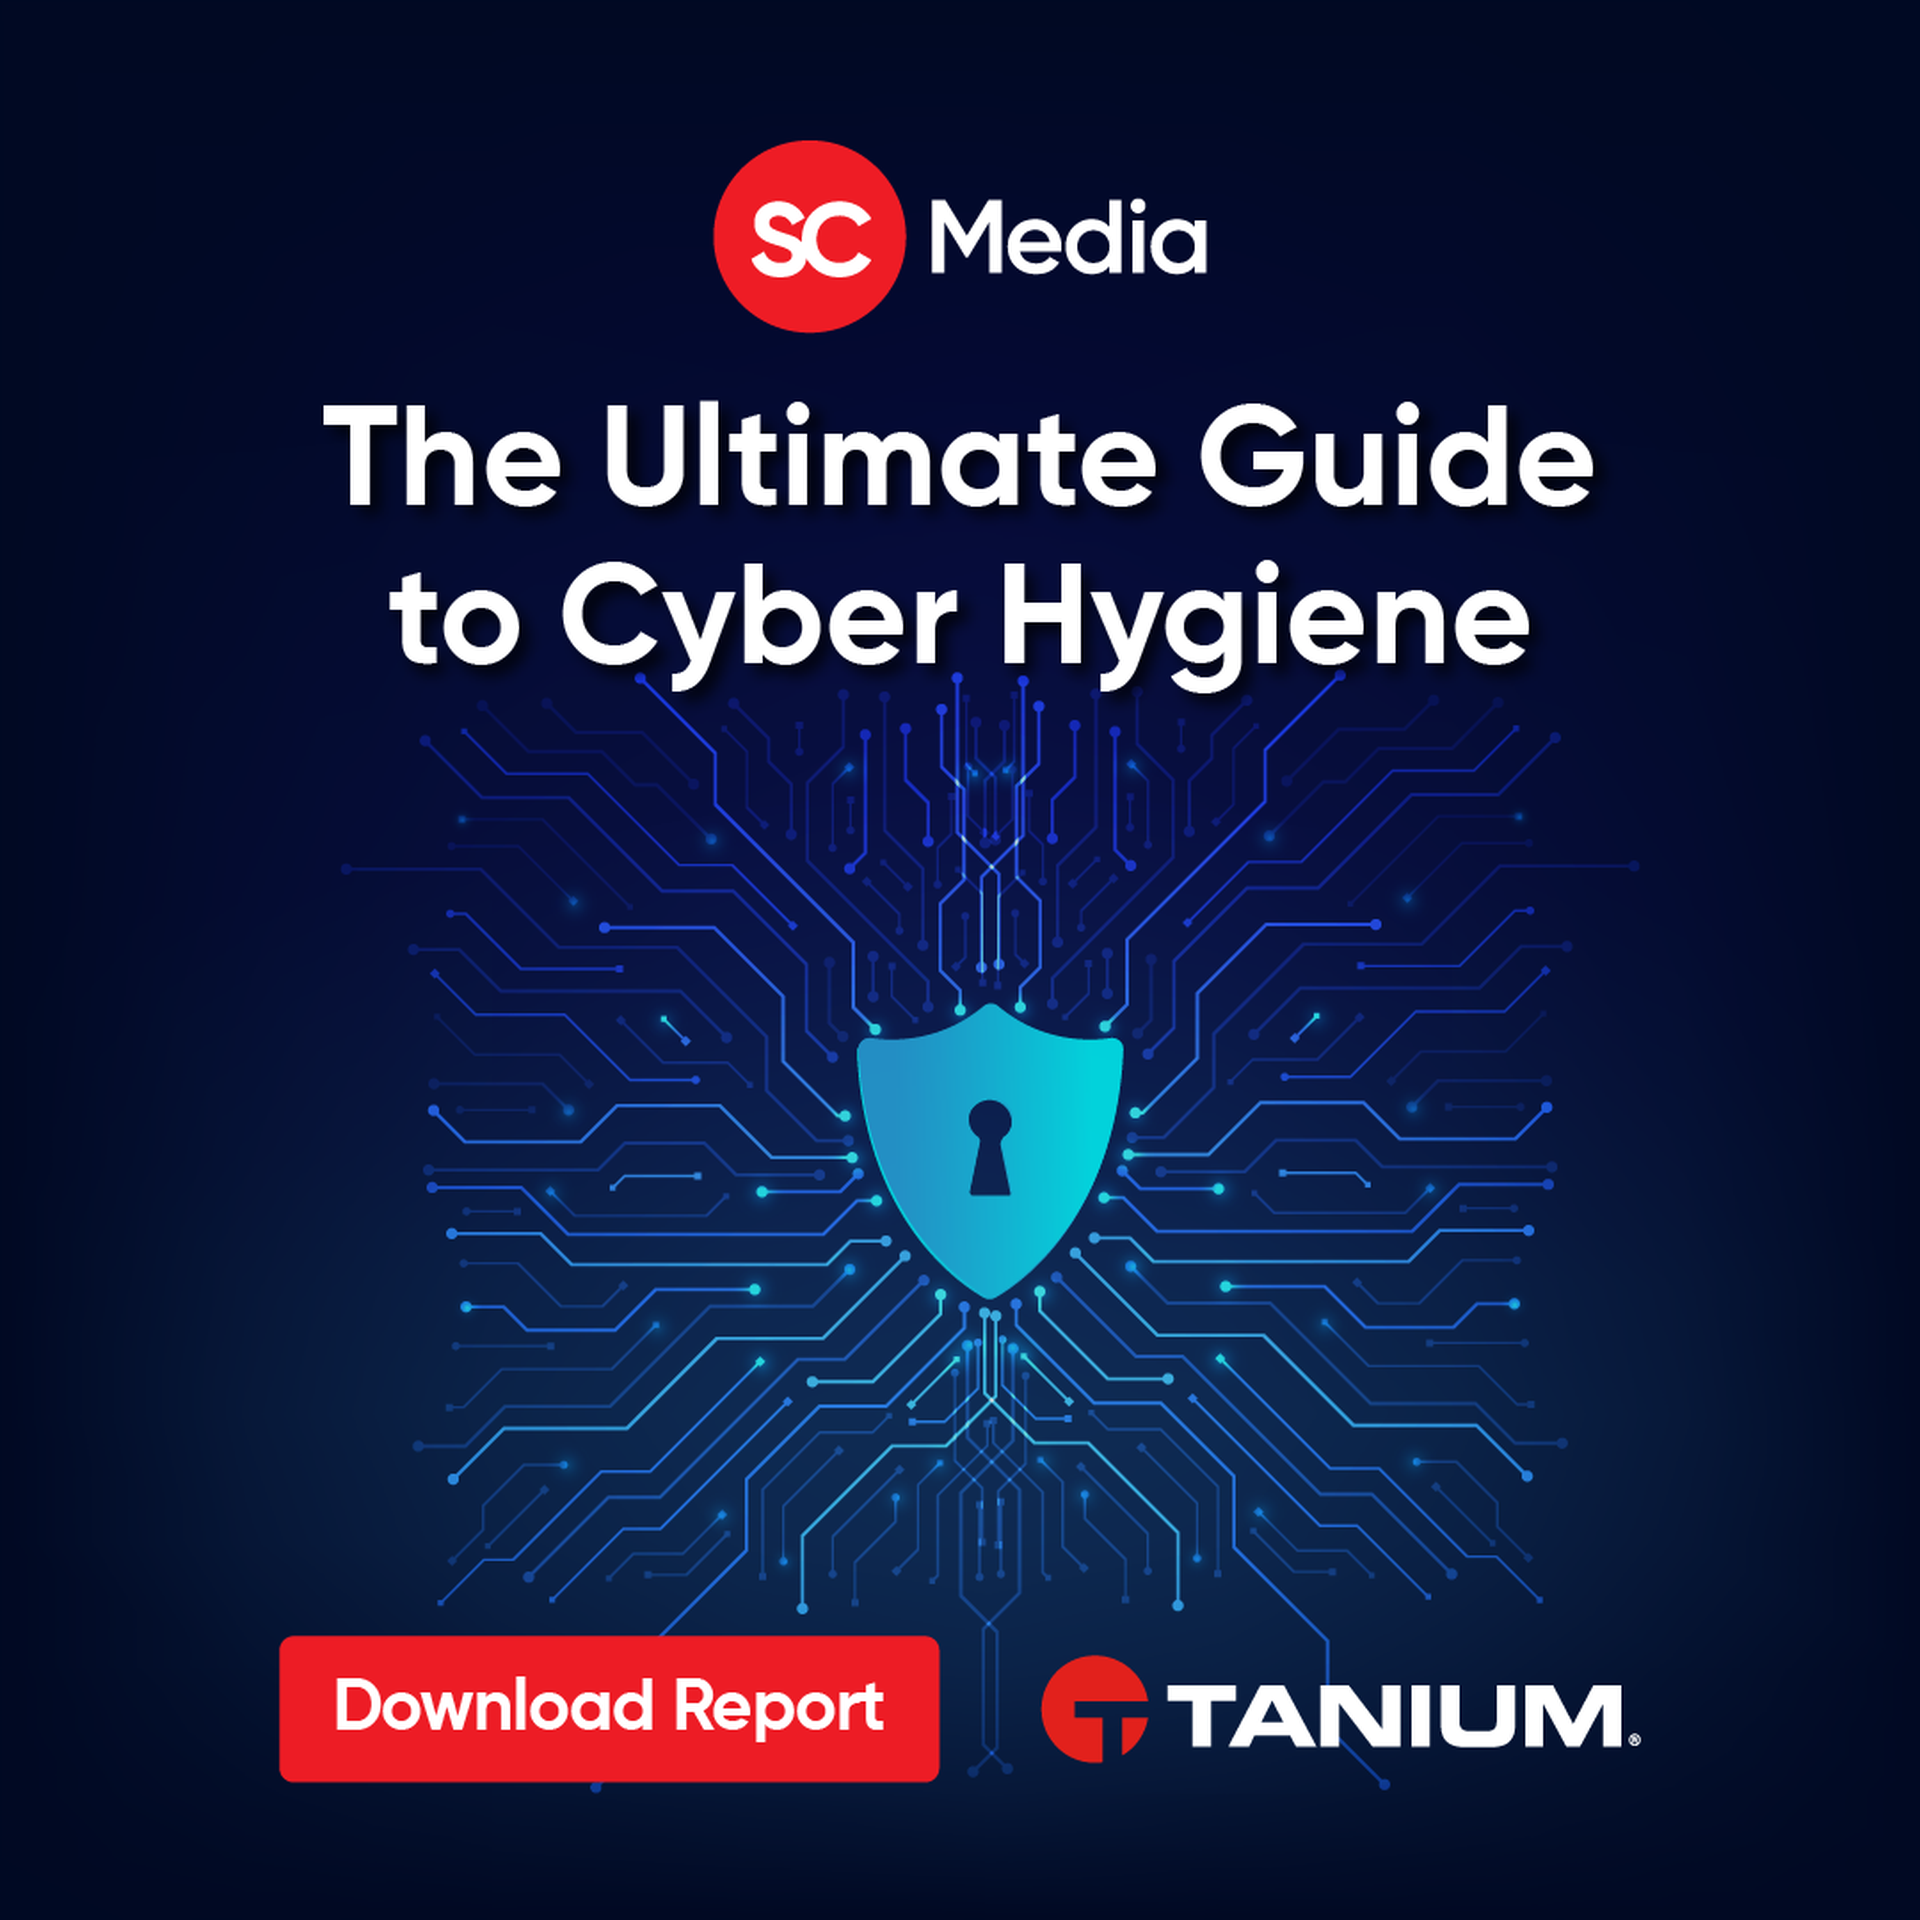 The Ultimate Guide to Cyber Hygiene